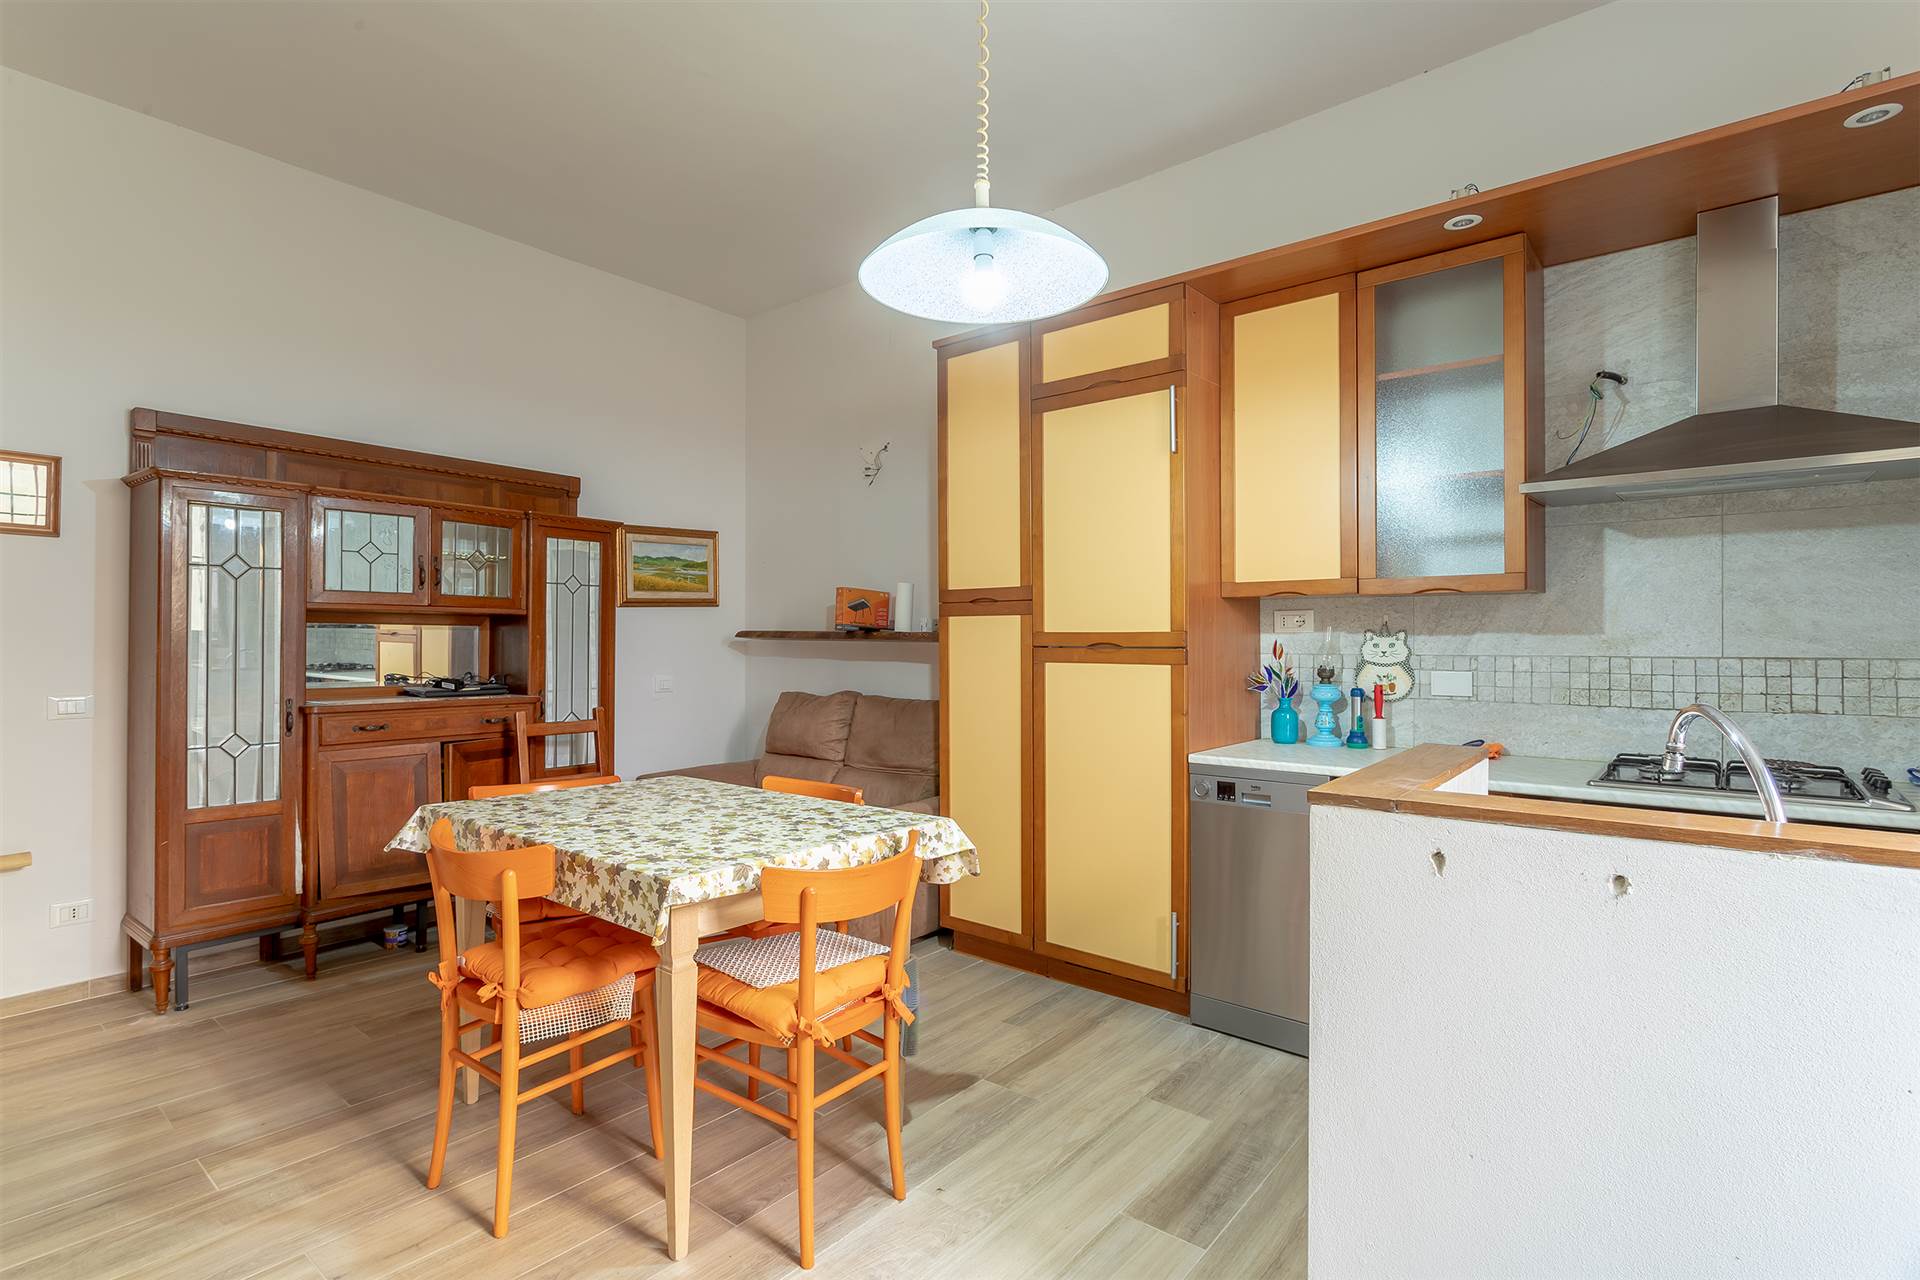 CAPALLE, CAMPI BISENZIO, Apartment for sale of 50 Sq. mt., Good condition, Heating Individual heating system, Energetic class: G, placed at Ground on 